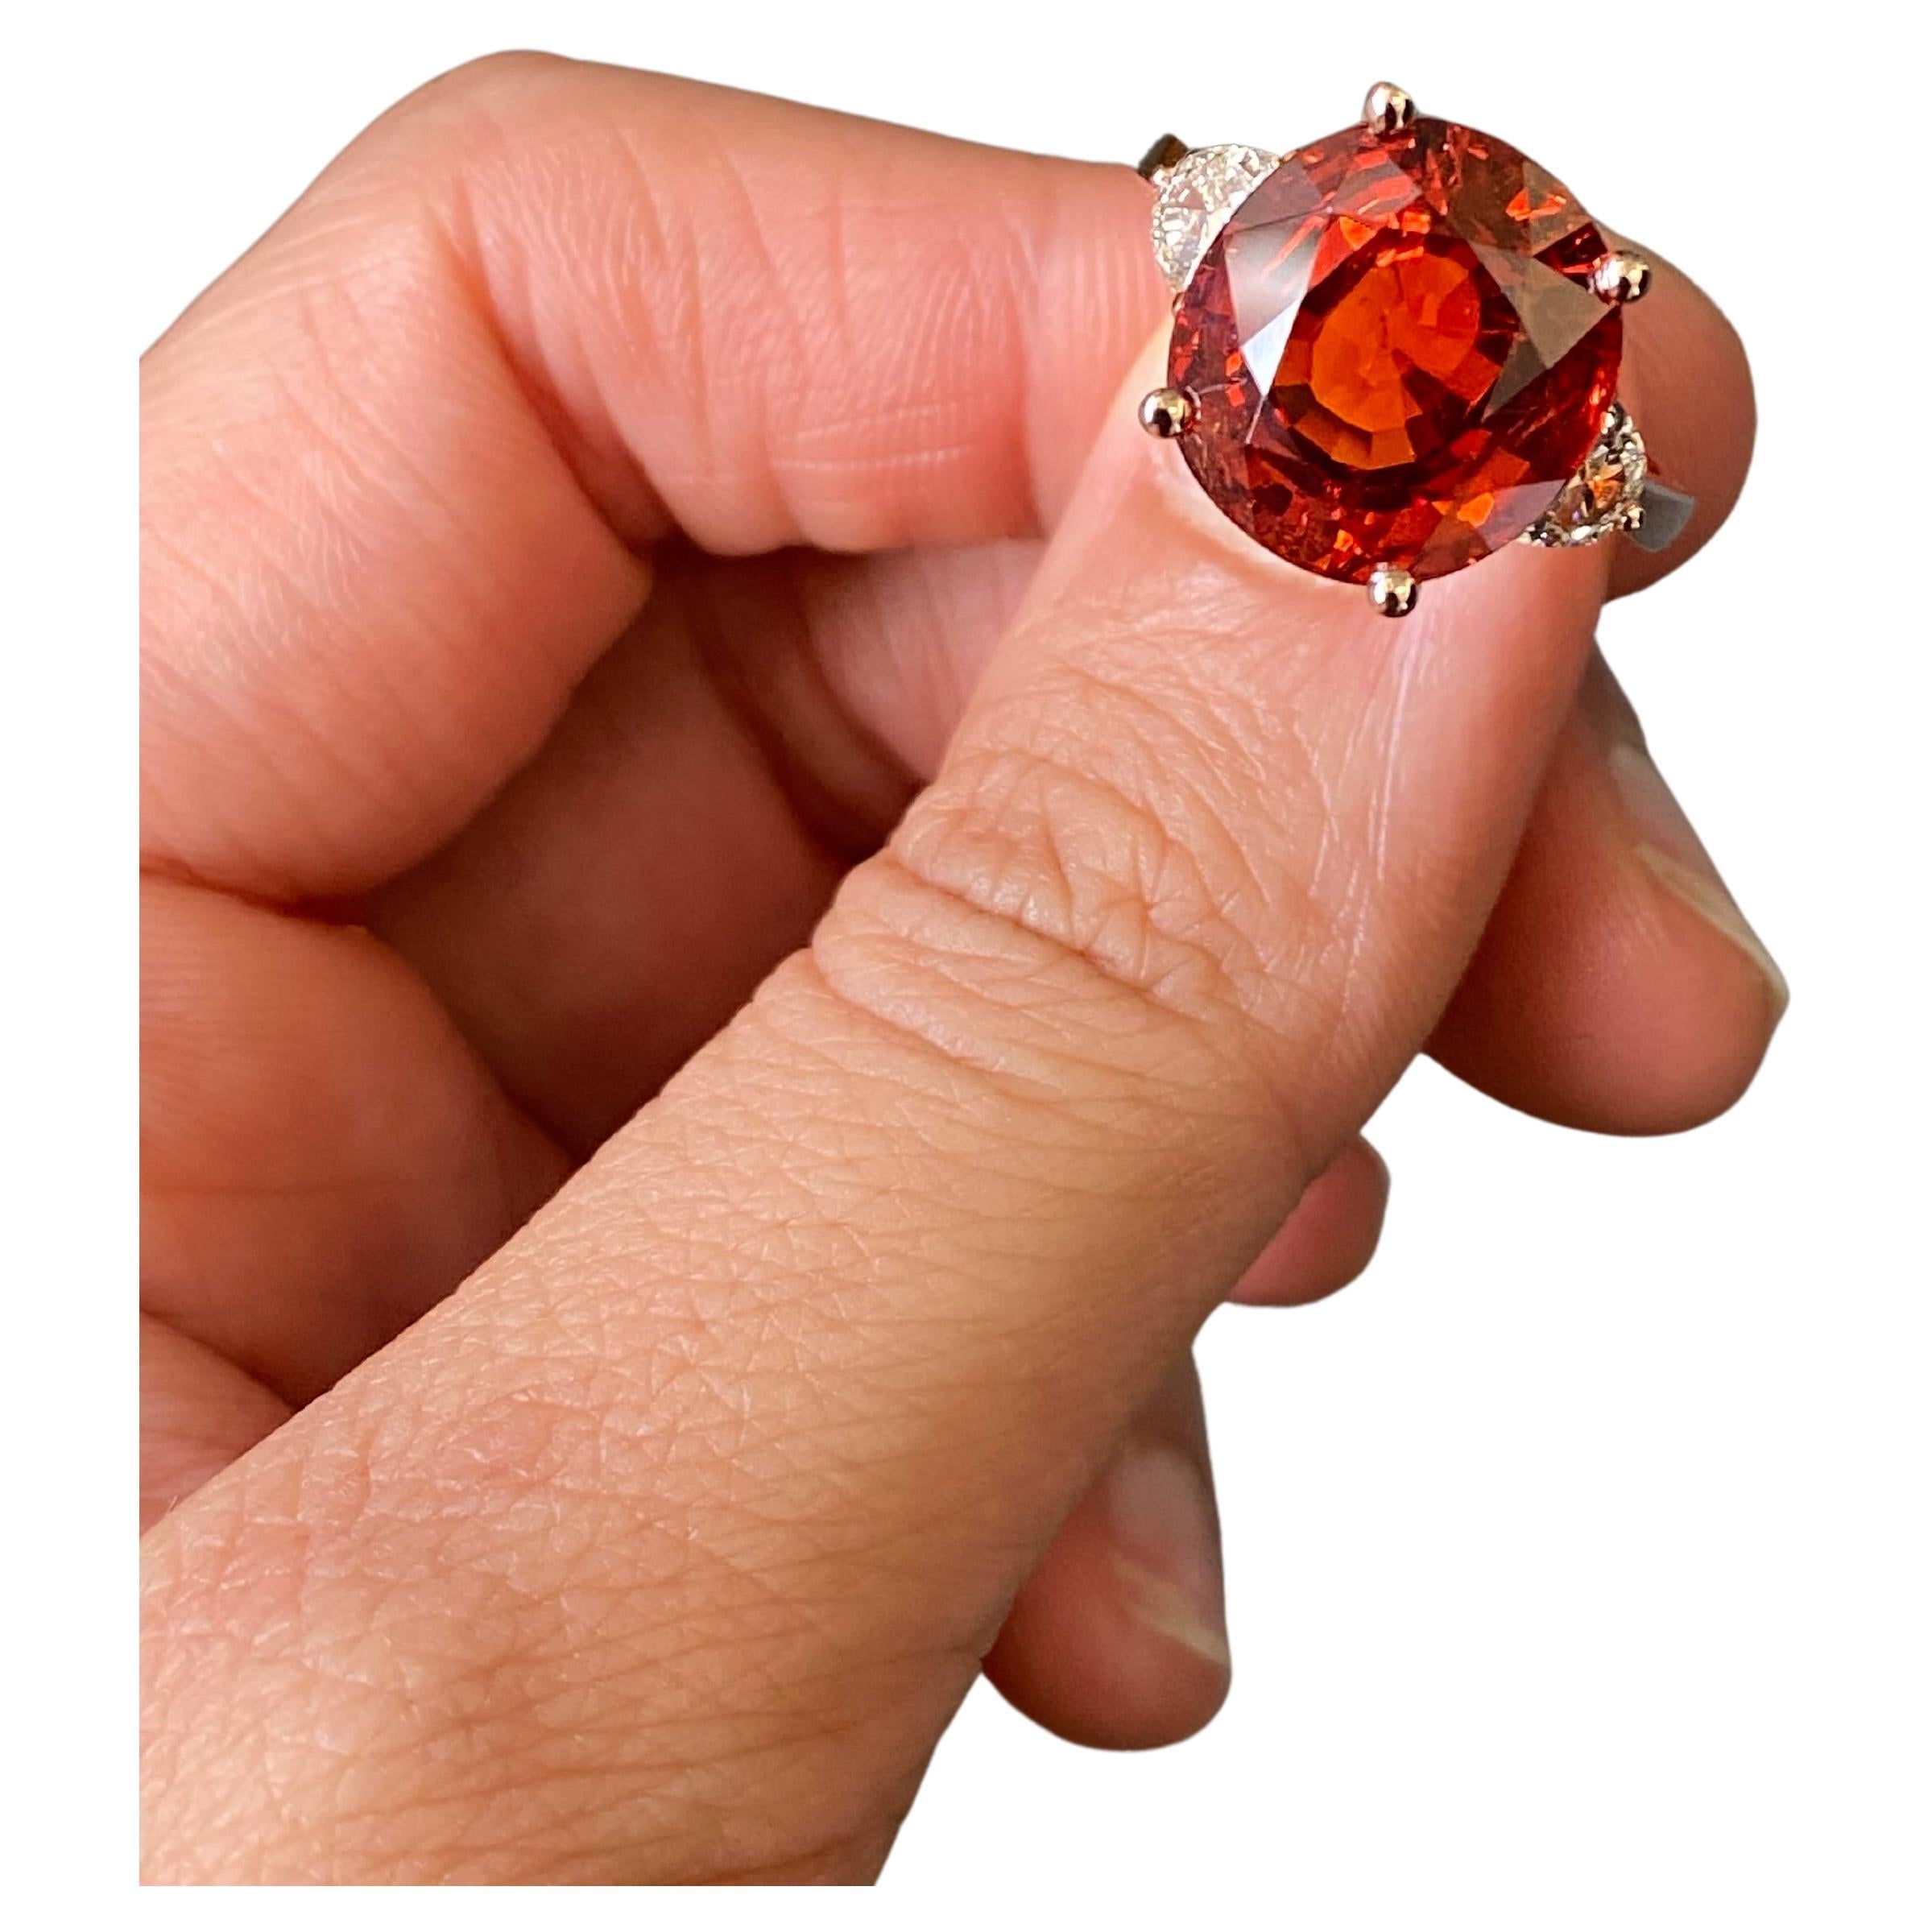 Ring Details :
Spessartine: 11.5 carat
Diamond: 0.42 carat
18K Gold Weight: 5.78 grams

Please feel free to message us for more information, the ring comes with a certificate from an independent gem lab. We will happily accept returns, and provide